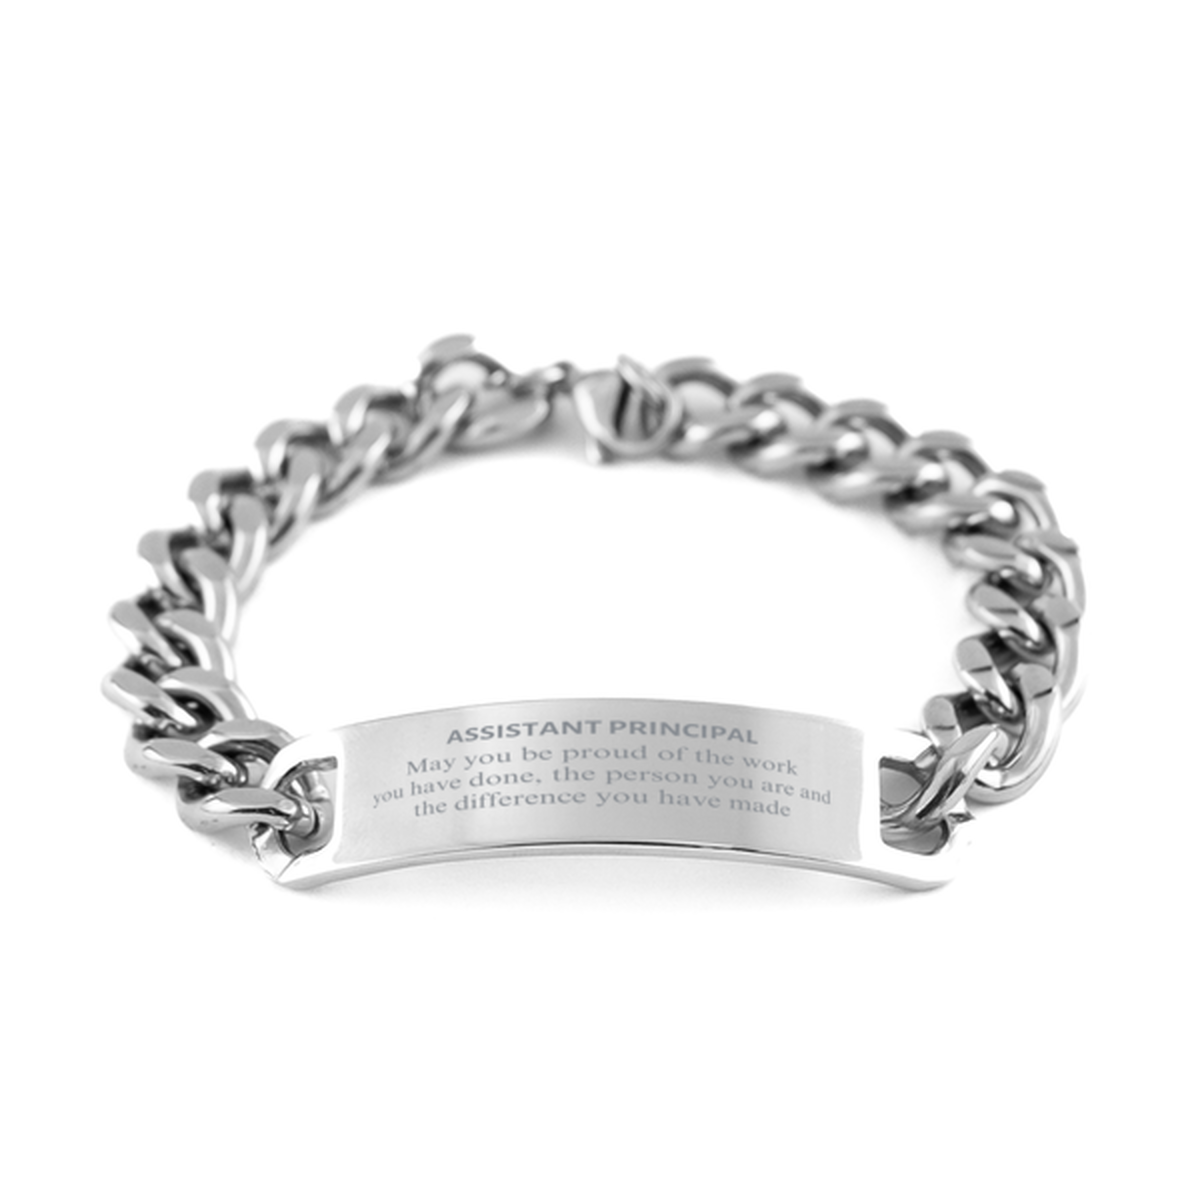 Assistant Principal May you be proud of the work you have done, Retirement Assistant Principal Cuban Chain Stainless Steel Bracelet for Colleague Appreciation Gifts Amazing for Assistant Principal